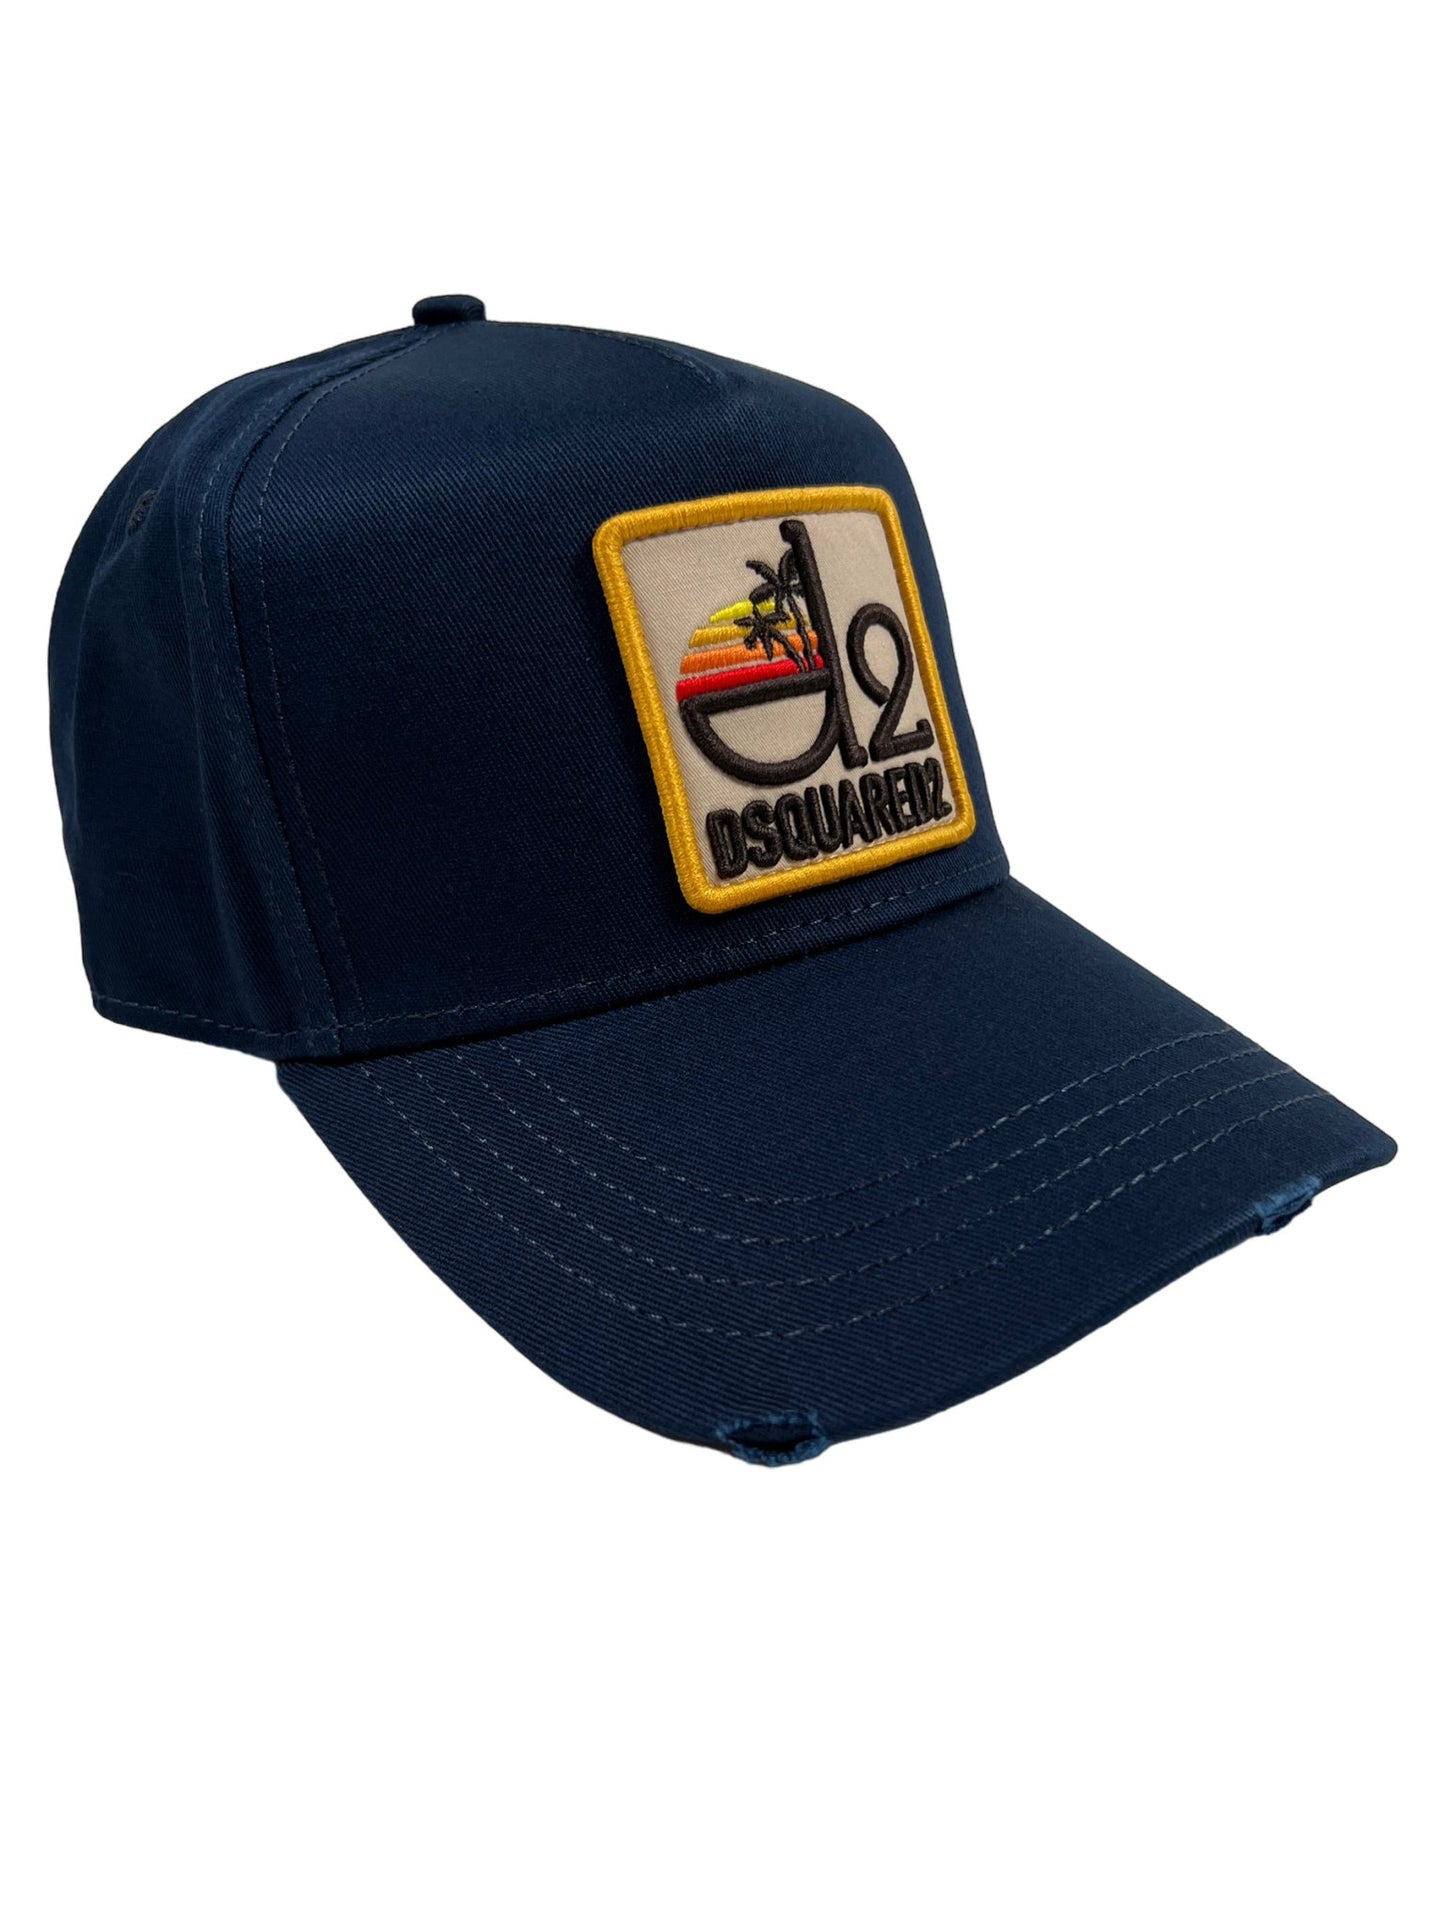 A DSQUARED2 BCM0802 TROPICAL BASEBALL CAP GABARDINE-NAVY hat with a palm tree patch on it.